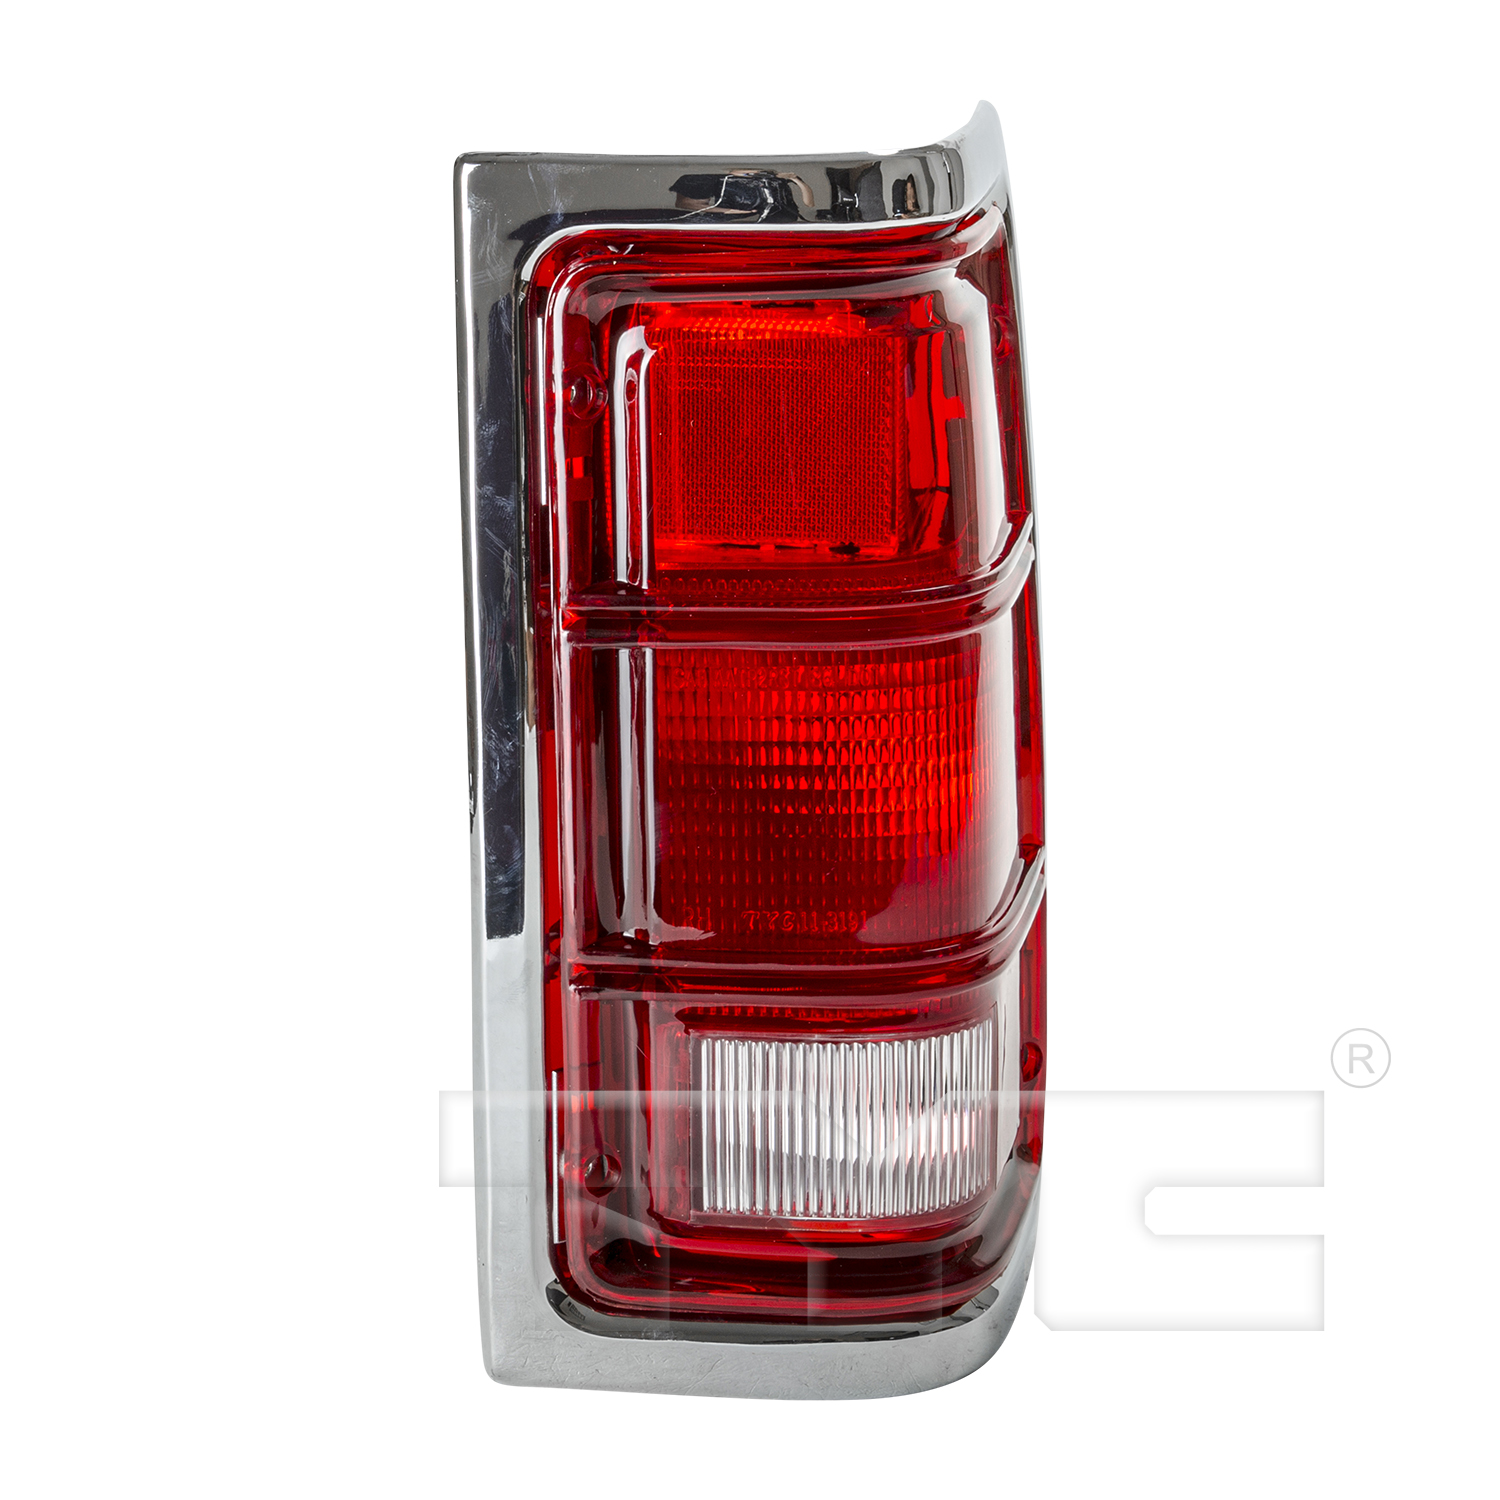 Aftermarket TAILLIGHTS for DODGE - D350, D350,92-93,RT Taillamp lens